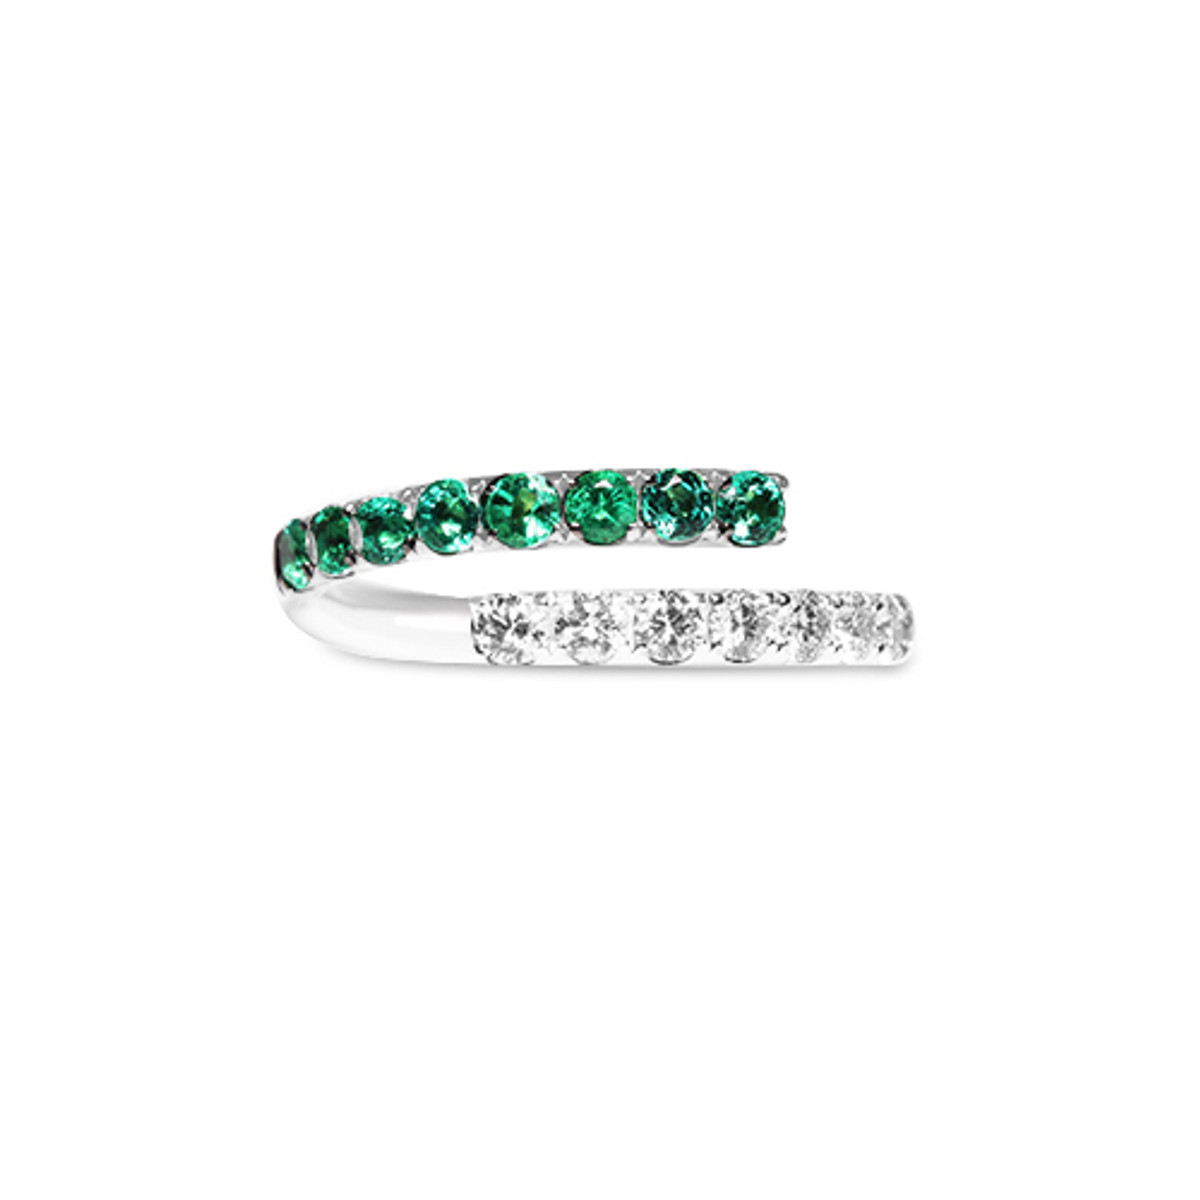 Hyde Park Collection 18K White Gold Diamond and Emerald Ring-DANVE00025 Product Image